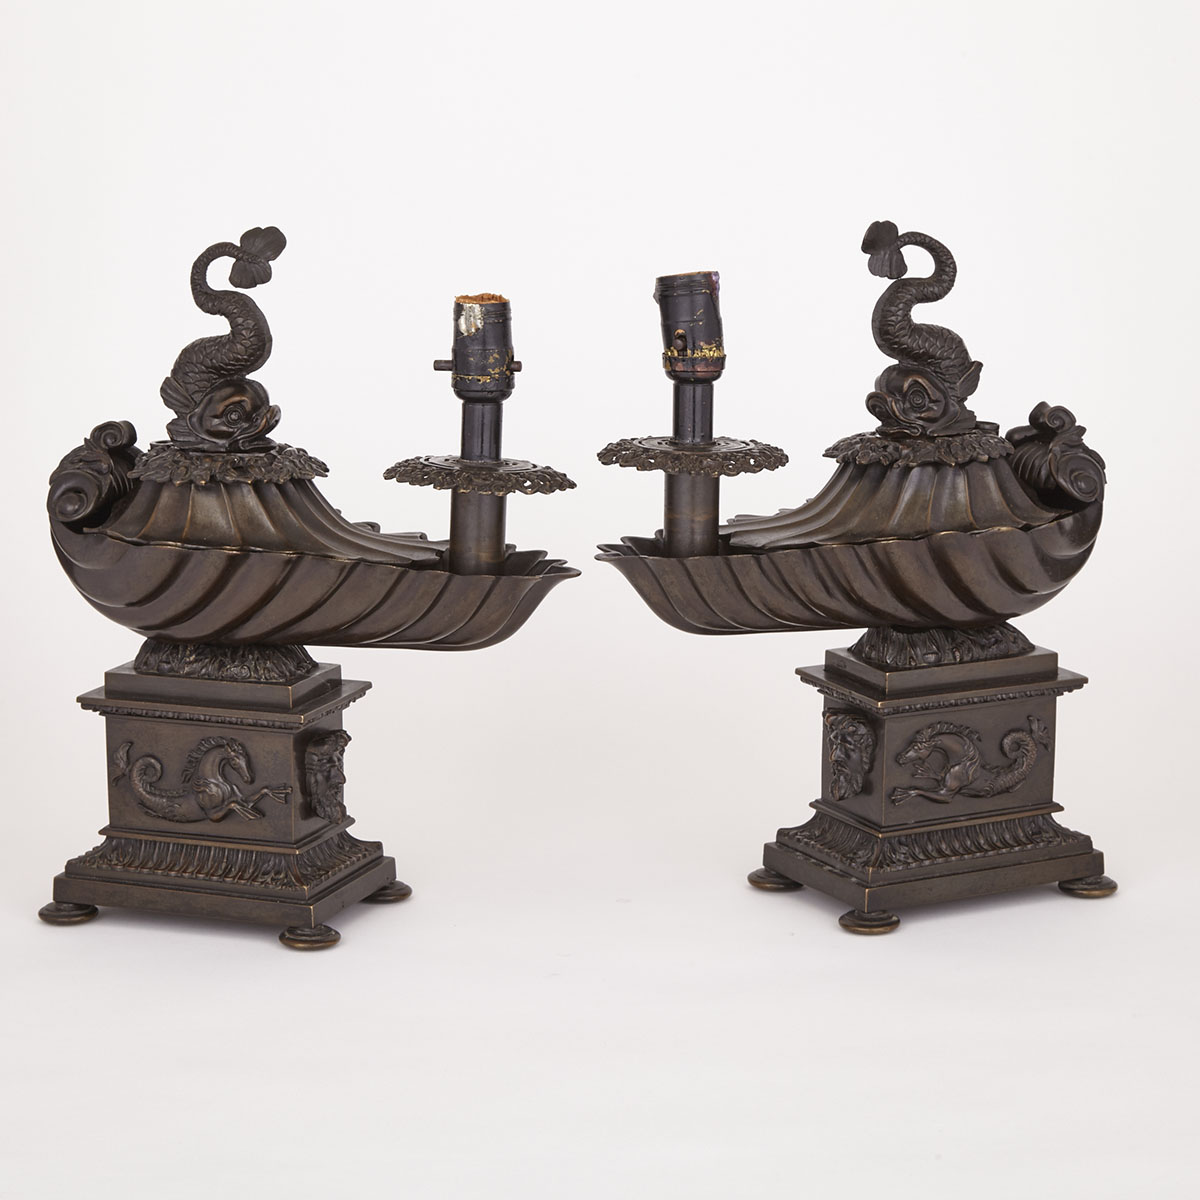 Pair of English Regency Patinated Bronze Argand Type Colza Oil Lamps, early 19th century